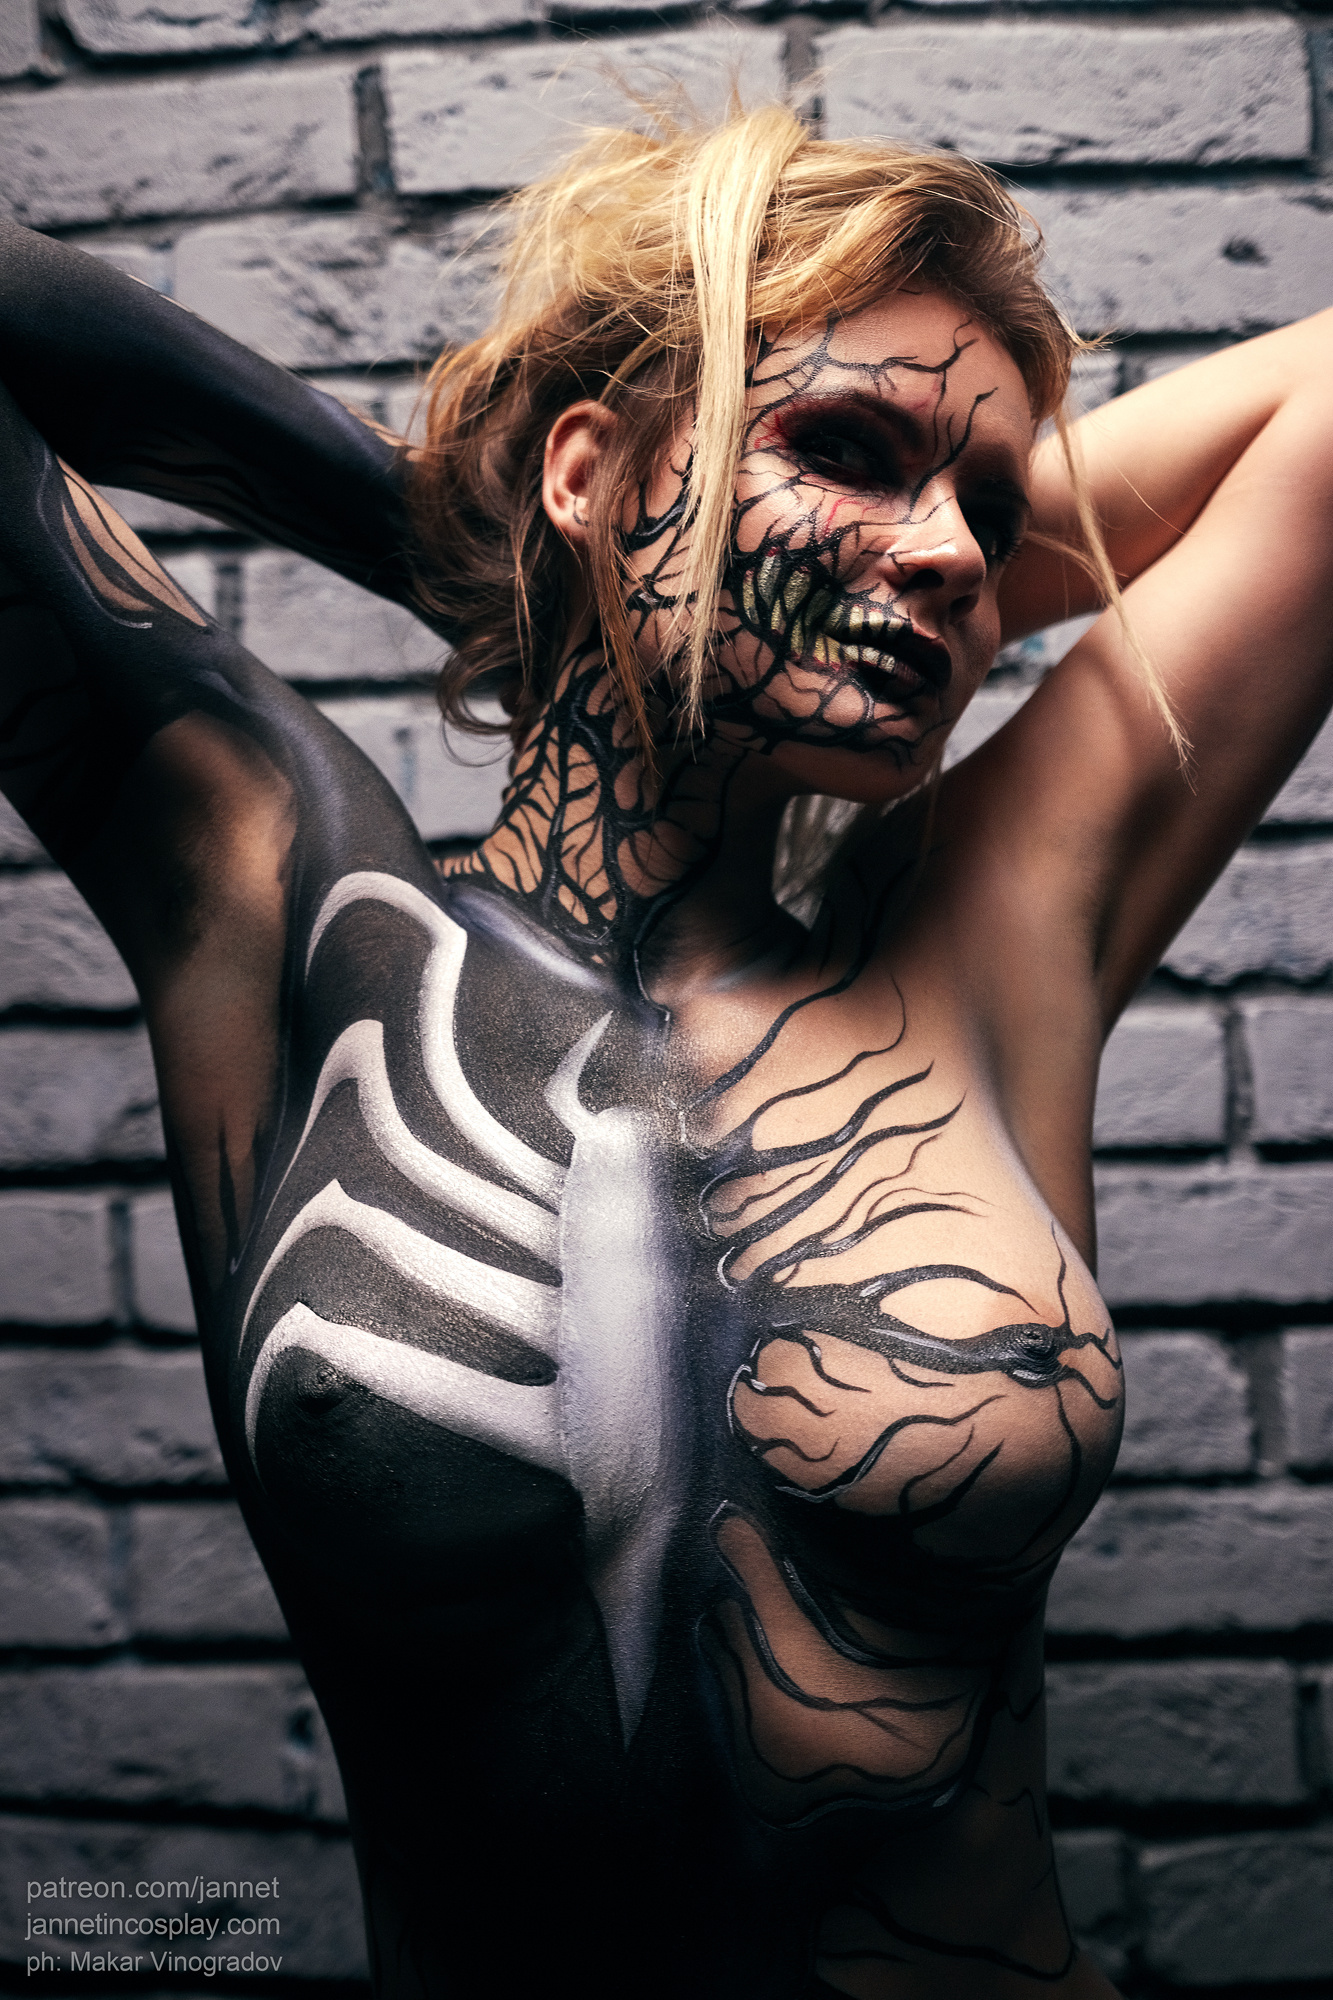 View She-Venom bodypaint [Jannetincosplay] for free | Simply-Cosplay